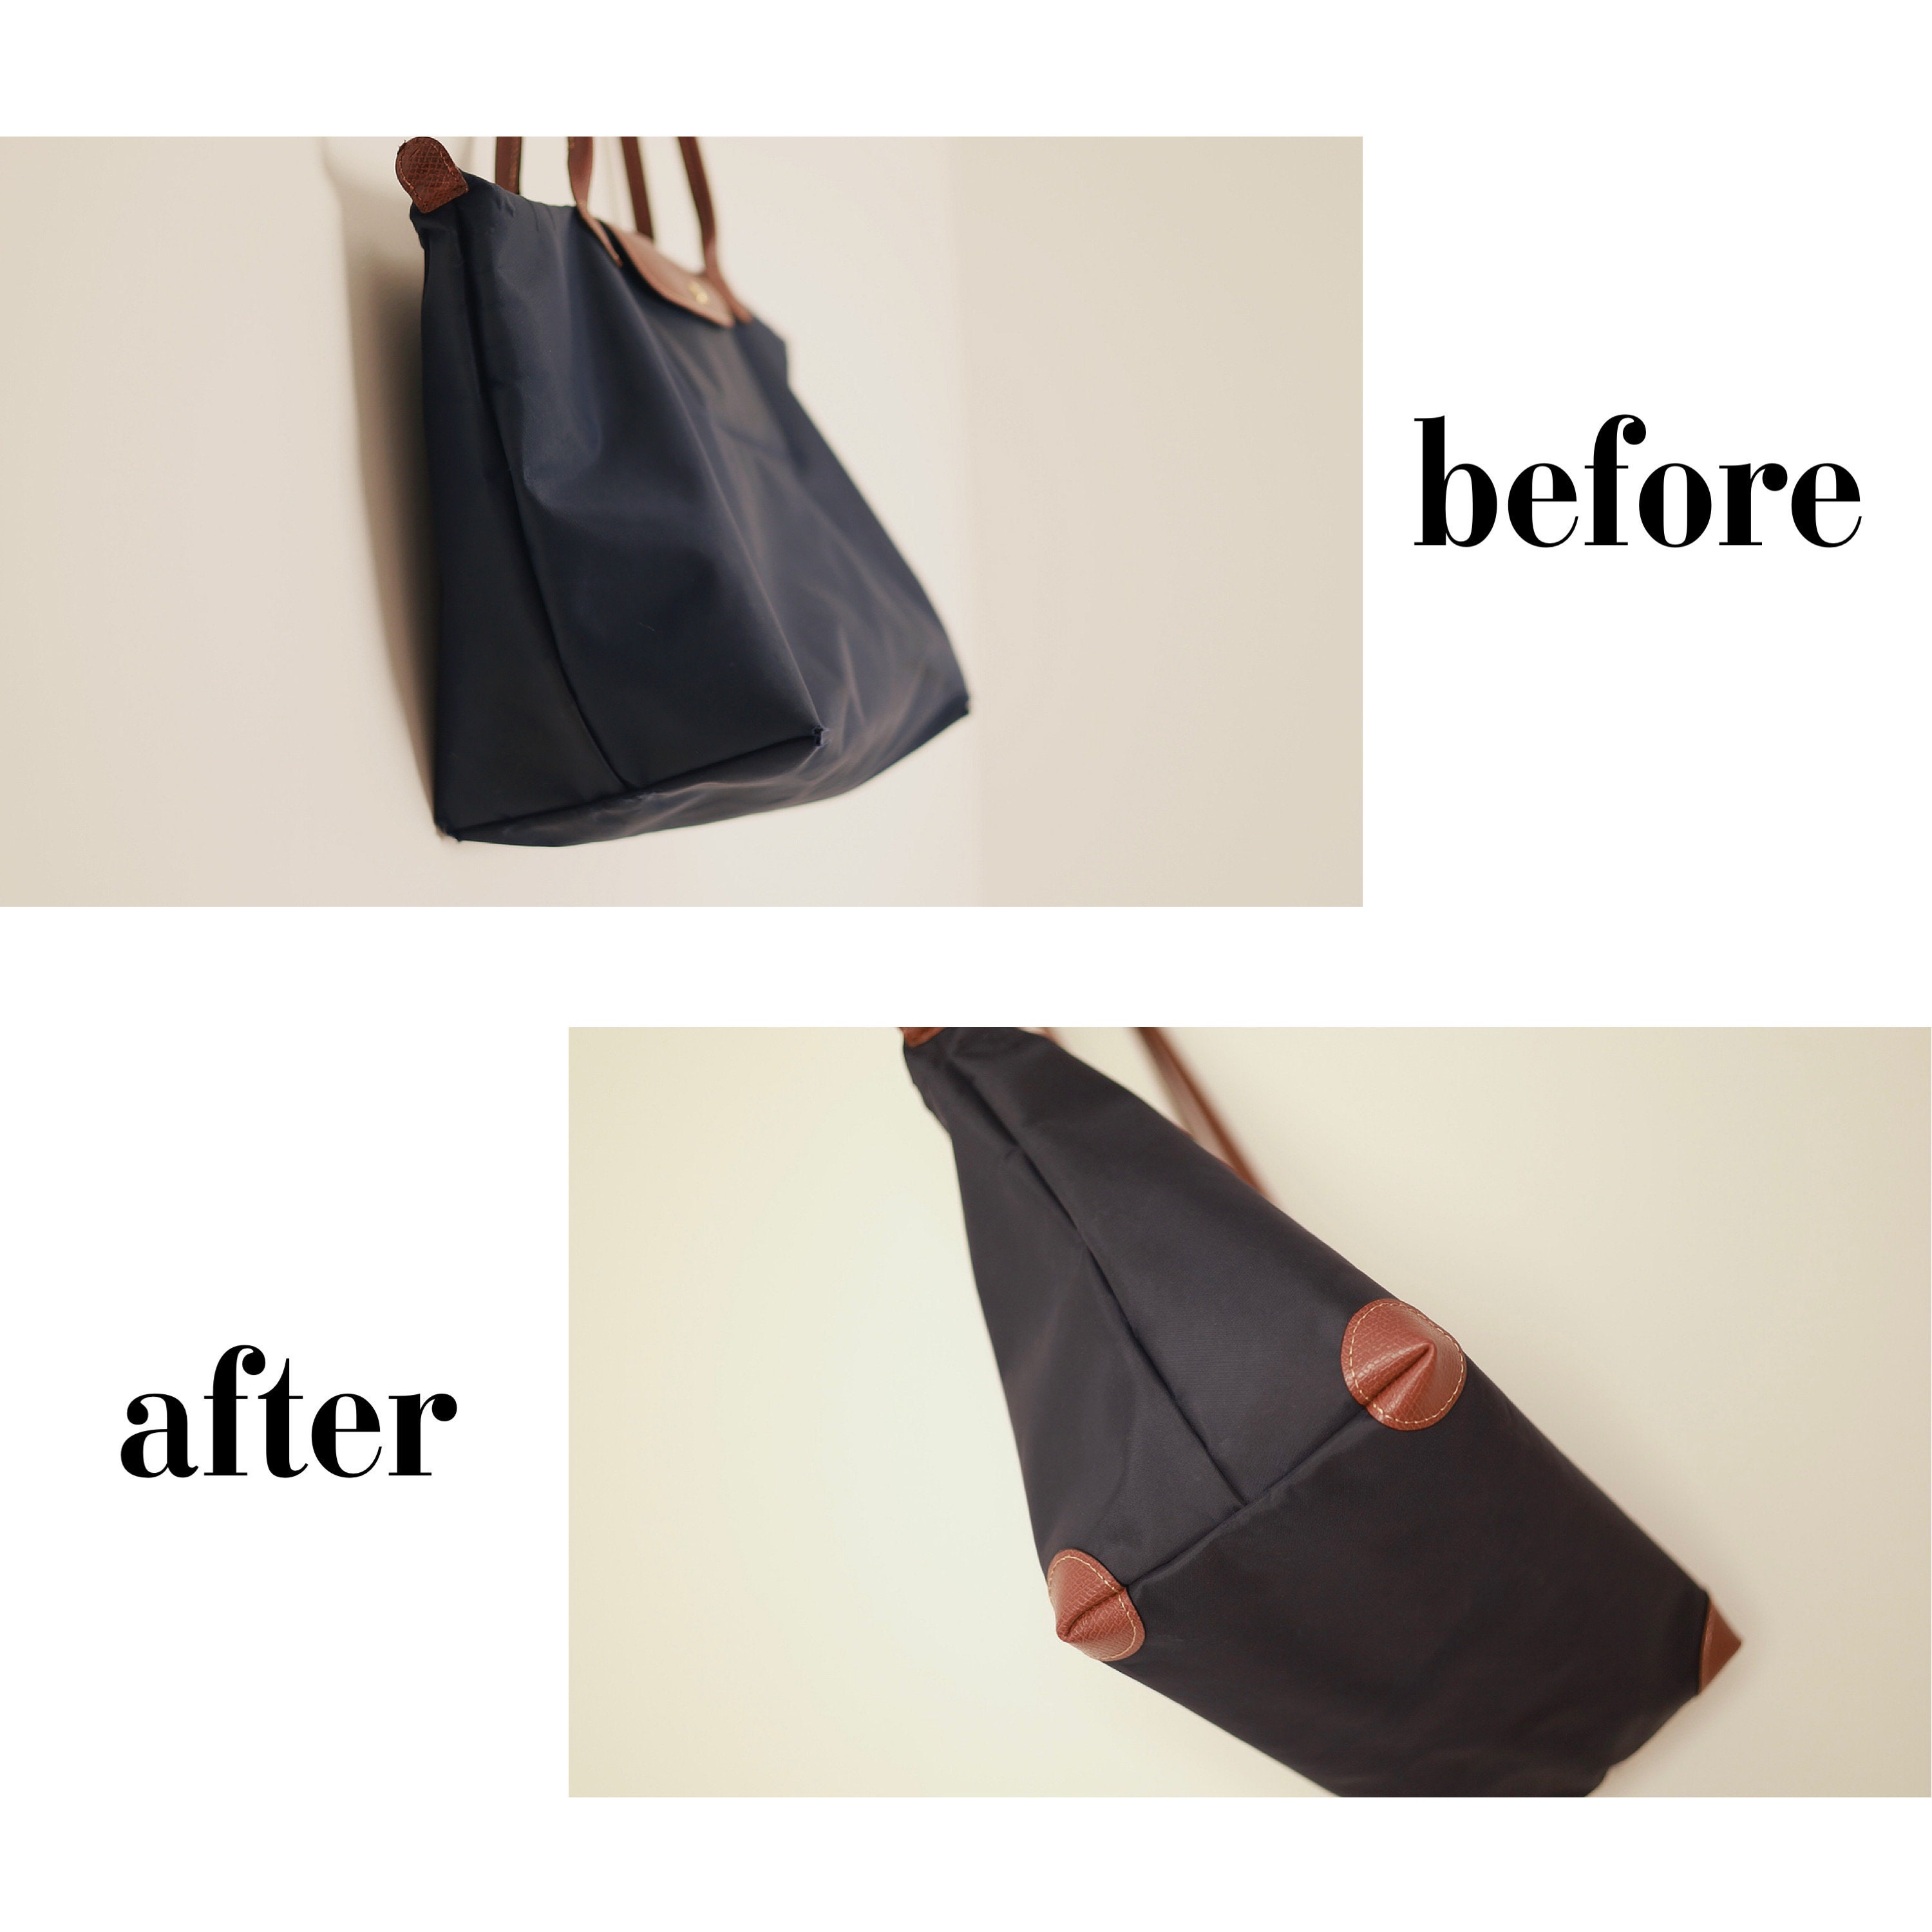 Patch Worn Corners - Repair scuffed bags - Aftercare for Luxury